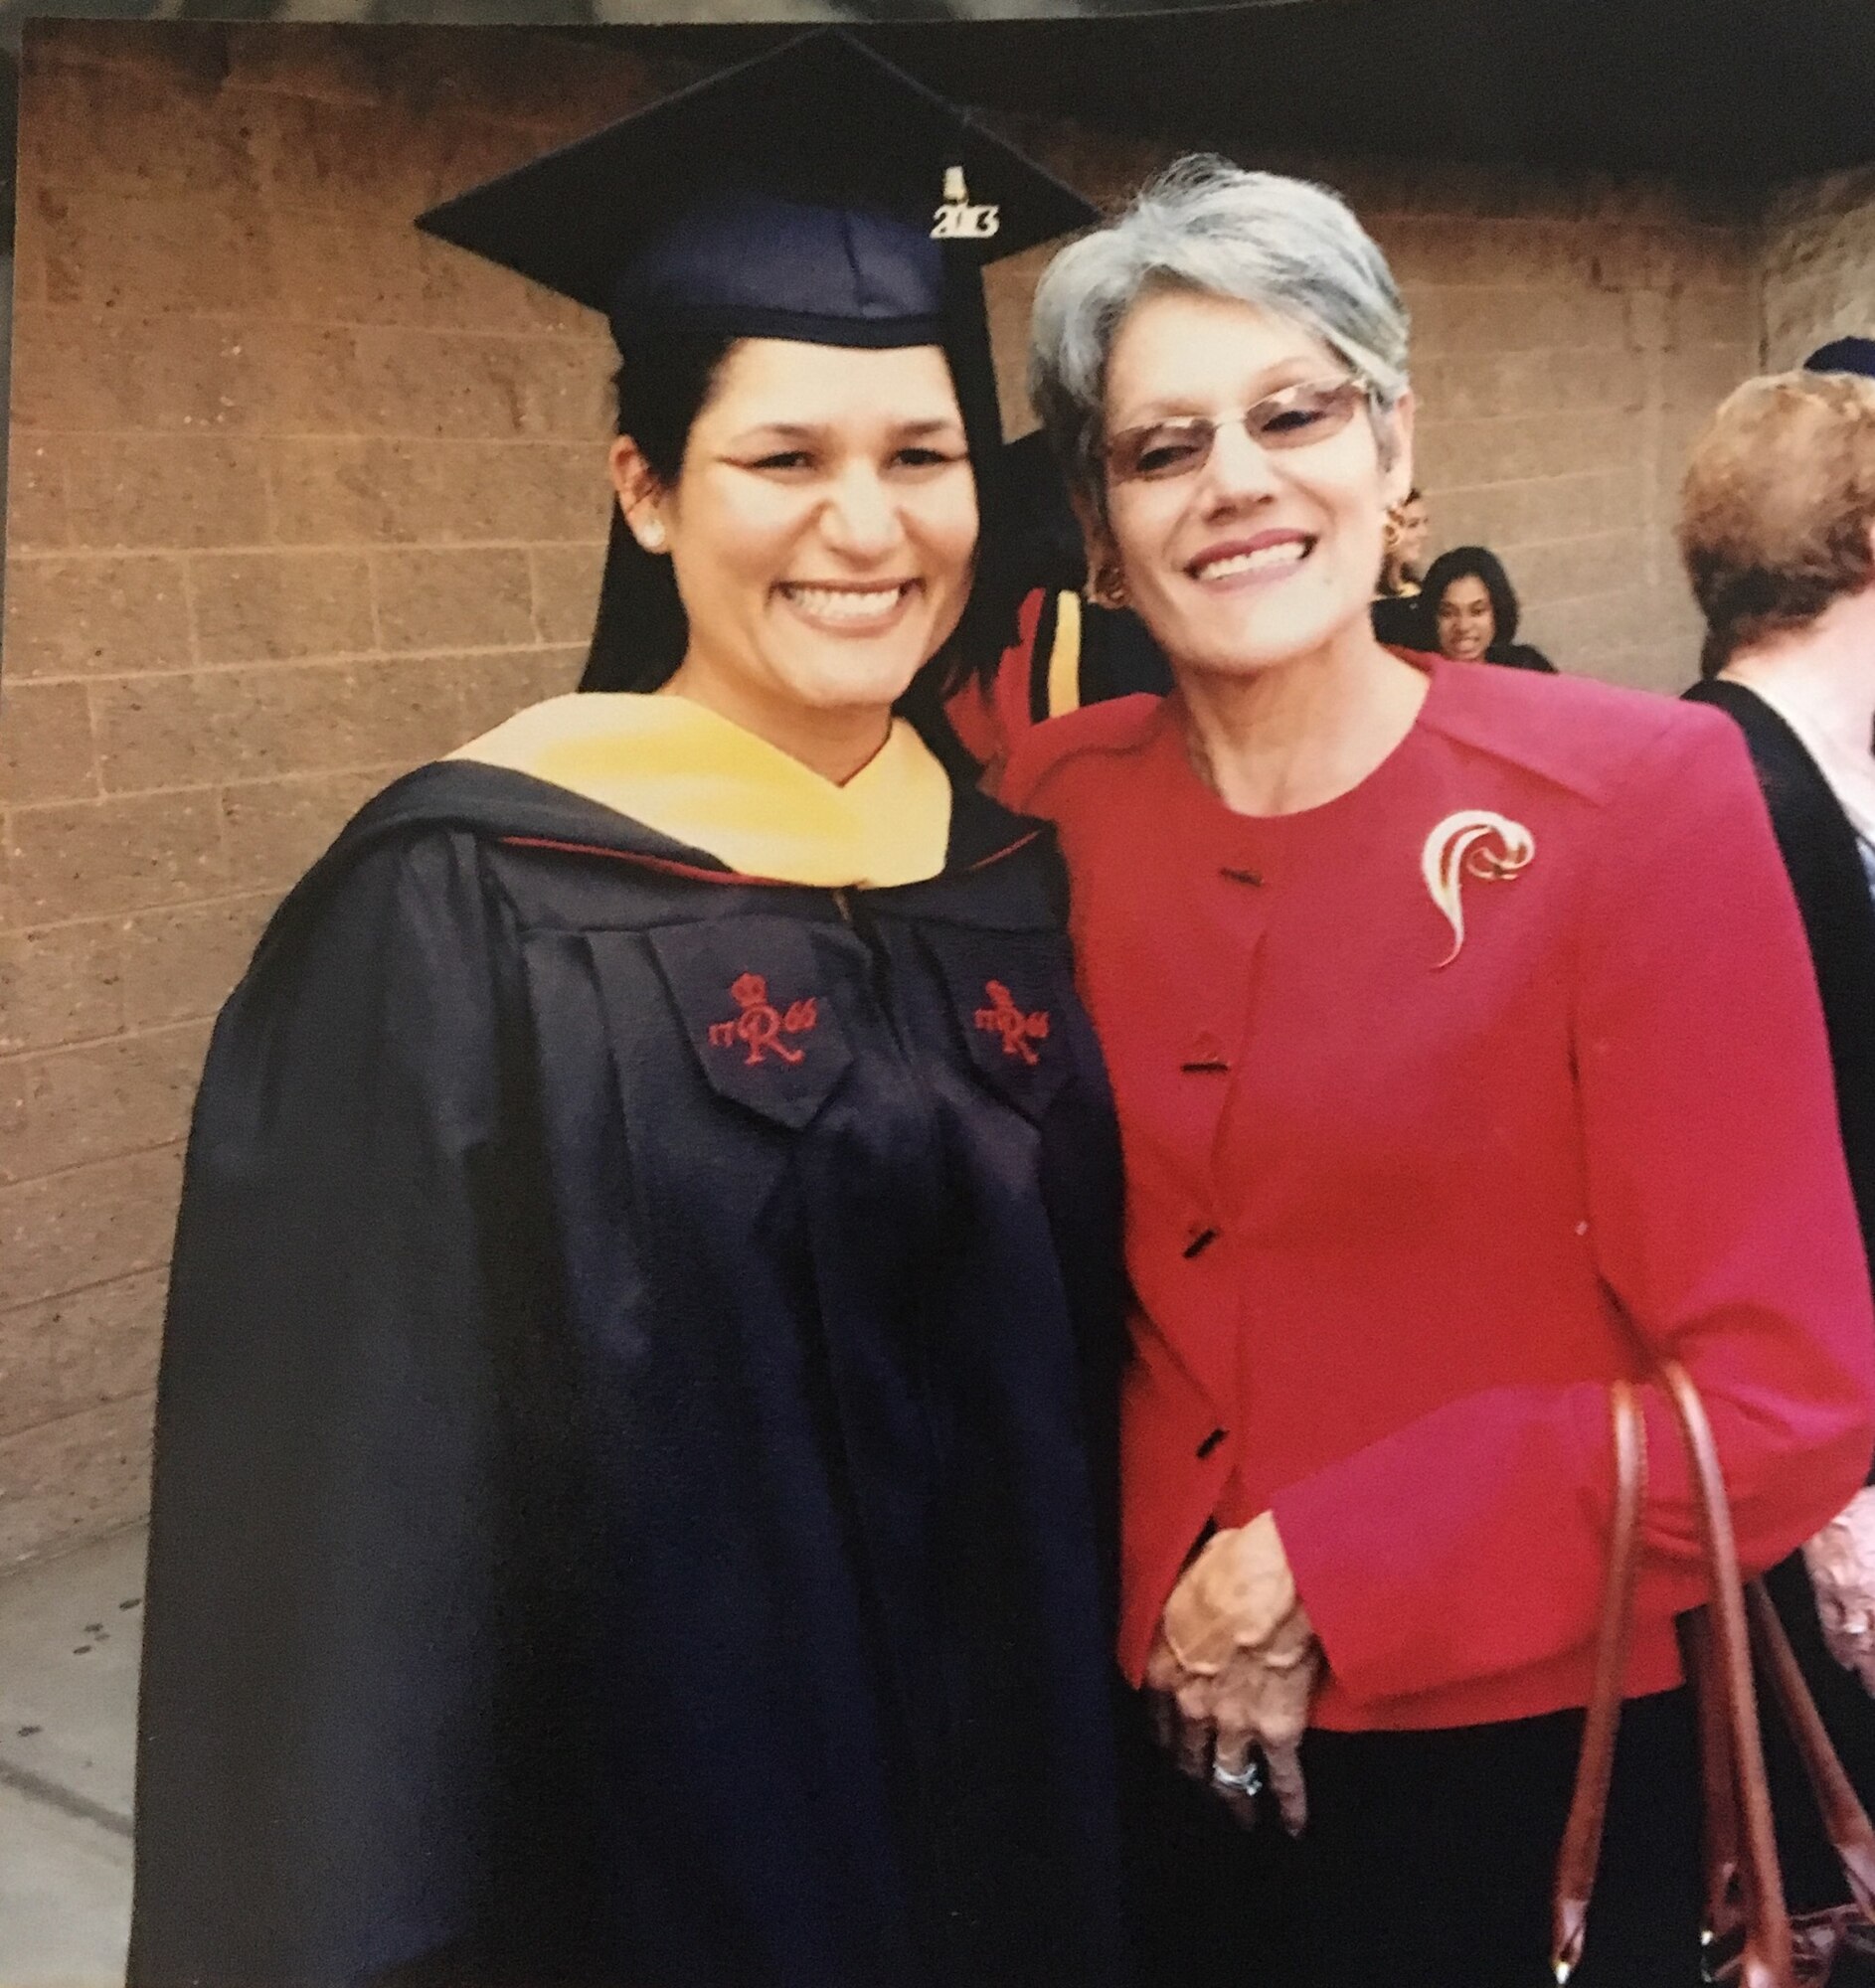 Master Sgt. Namir Laureano, left, smiles for a photo with her mom, Norma Miranda, after graduating with her master's degree in social work at Rutgers University in New Brunswick, N.J., June 2013. (Courtesy photo provided by Master Sgt. Namir Laureano)